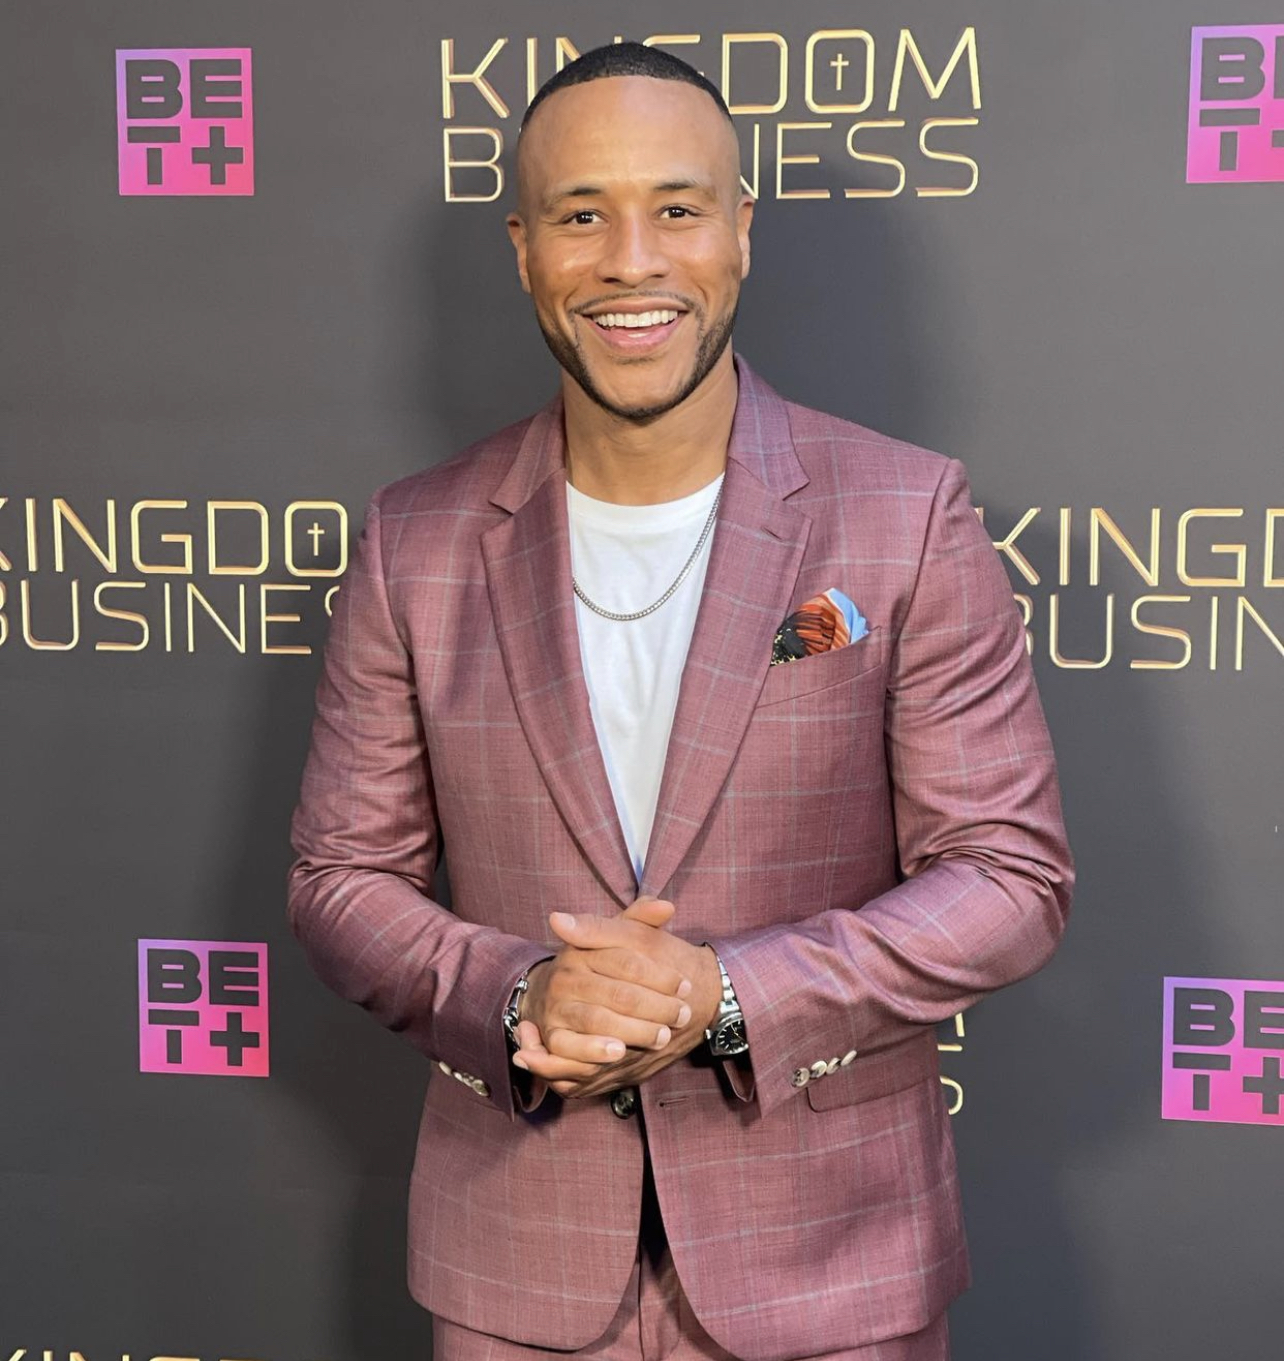 Devon Franklin is joining as ‘married at first sight’ as one of the new experts